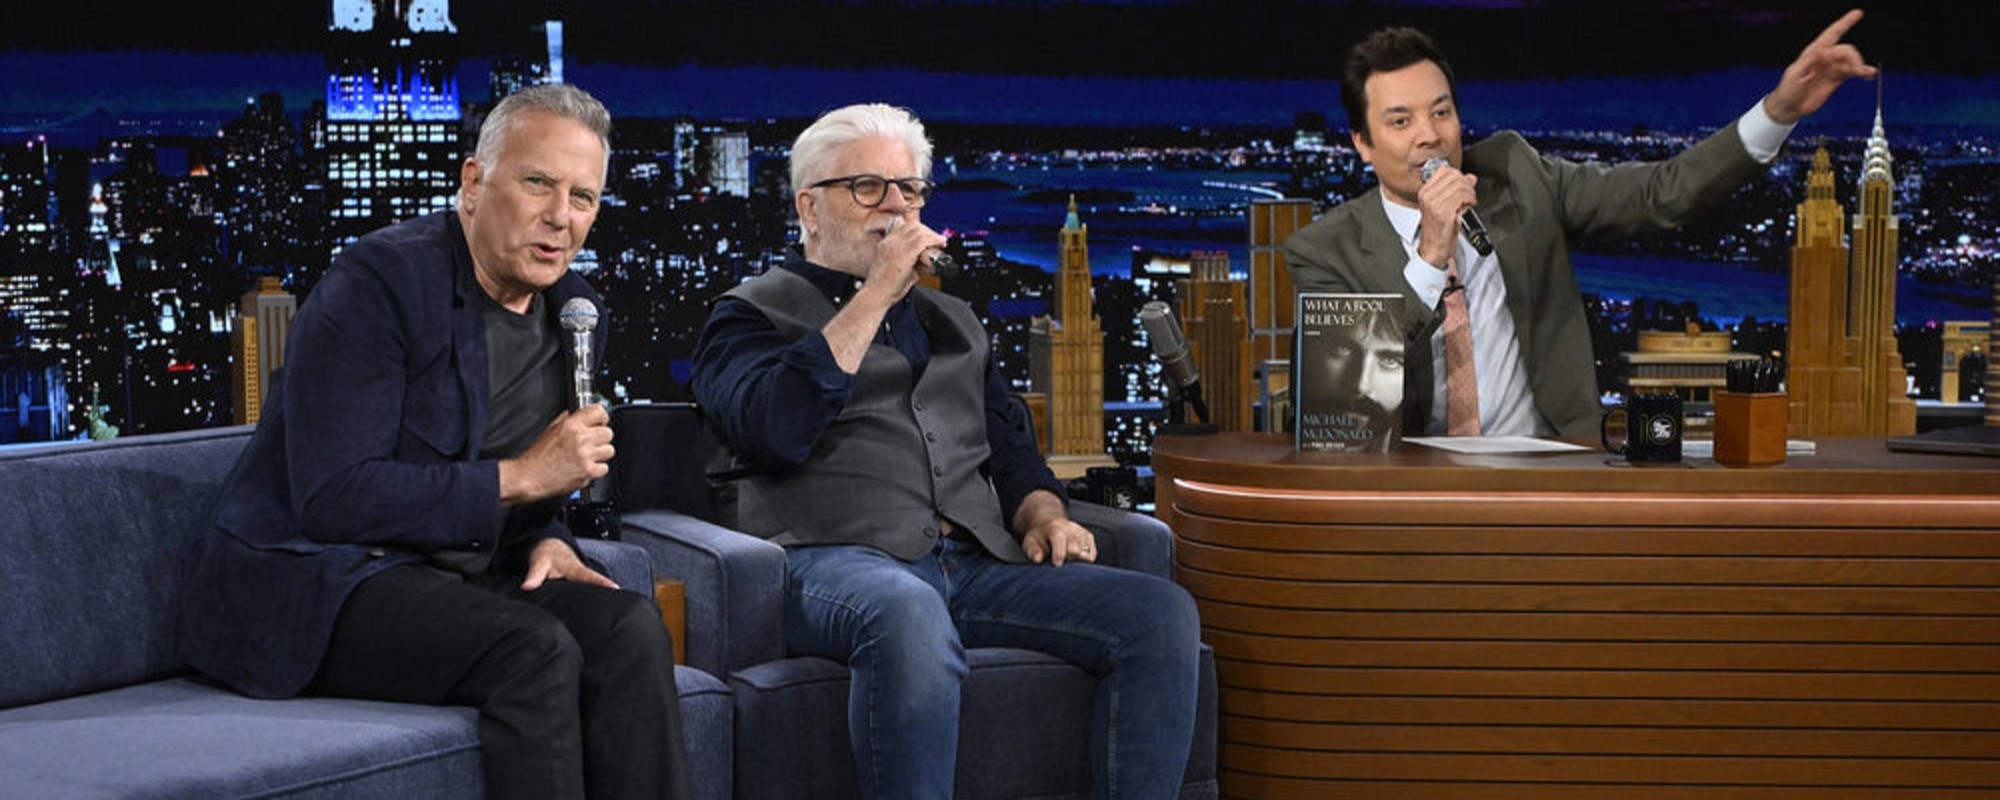 Watch Michael McDonald Croon His Doobie Brothers Hit “Takin’ It to the Streets” with Jimmy Fallon and The Roots